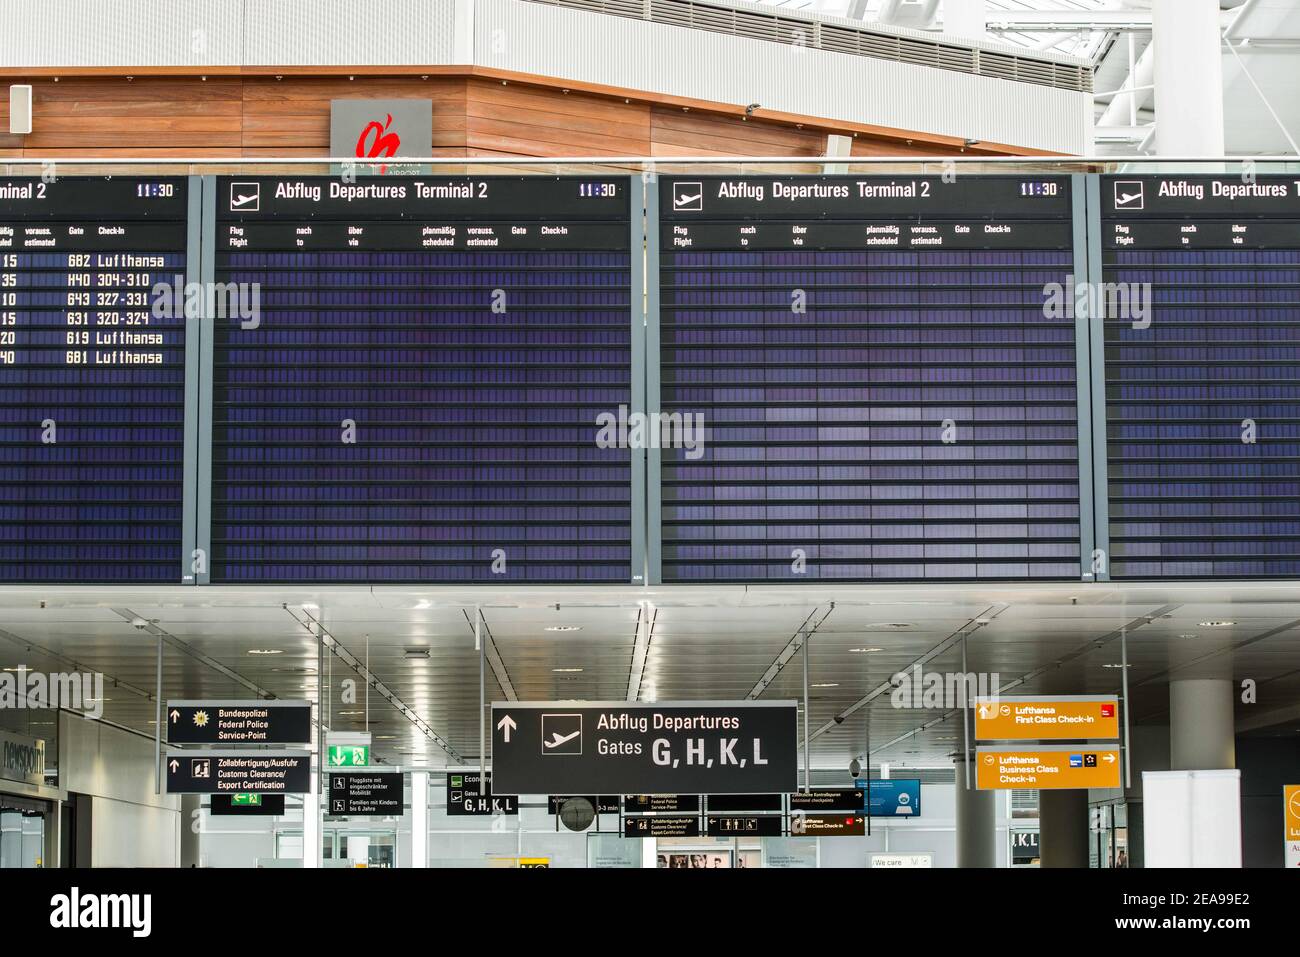 Freising Bei Muenchen, Bavaria, Germany. 8th Feb, 2021. Empty departure boards at the Munich International Airport. The Bavarian Interior Ministry in collaboration with the German Federal Police (Bundespolizei) and the Grenzpolizei (Border Police) held a presentation on their roles in fighting the Corona pandemic at airports. Part of the strategy to prevent the importation of the novel Coronavirus, particularly the mutant variants prevalent in South Africa, the United Kingdom, and Brazil involves the DEA Digital Entry Regulation, testing at the airports, quarantine, and an agreement from a Stock Photo